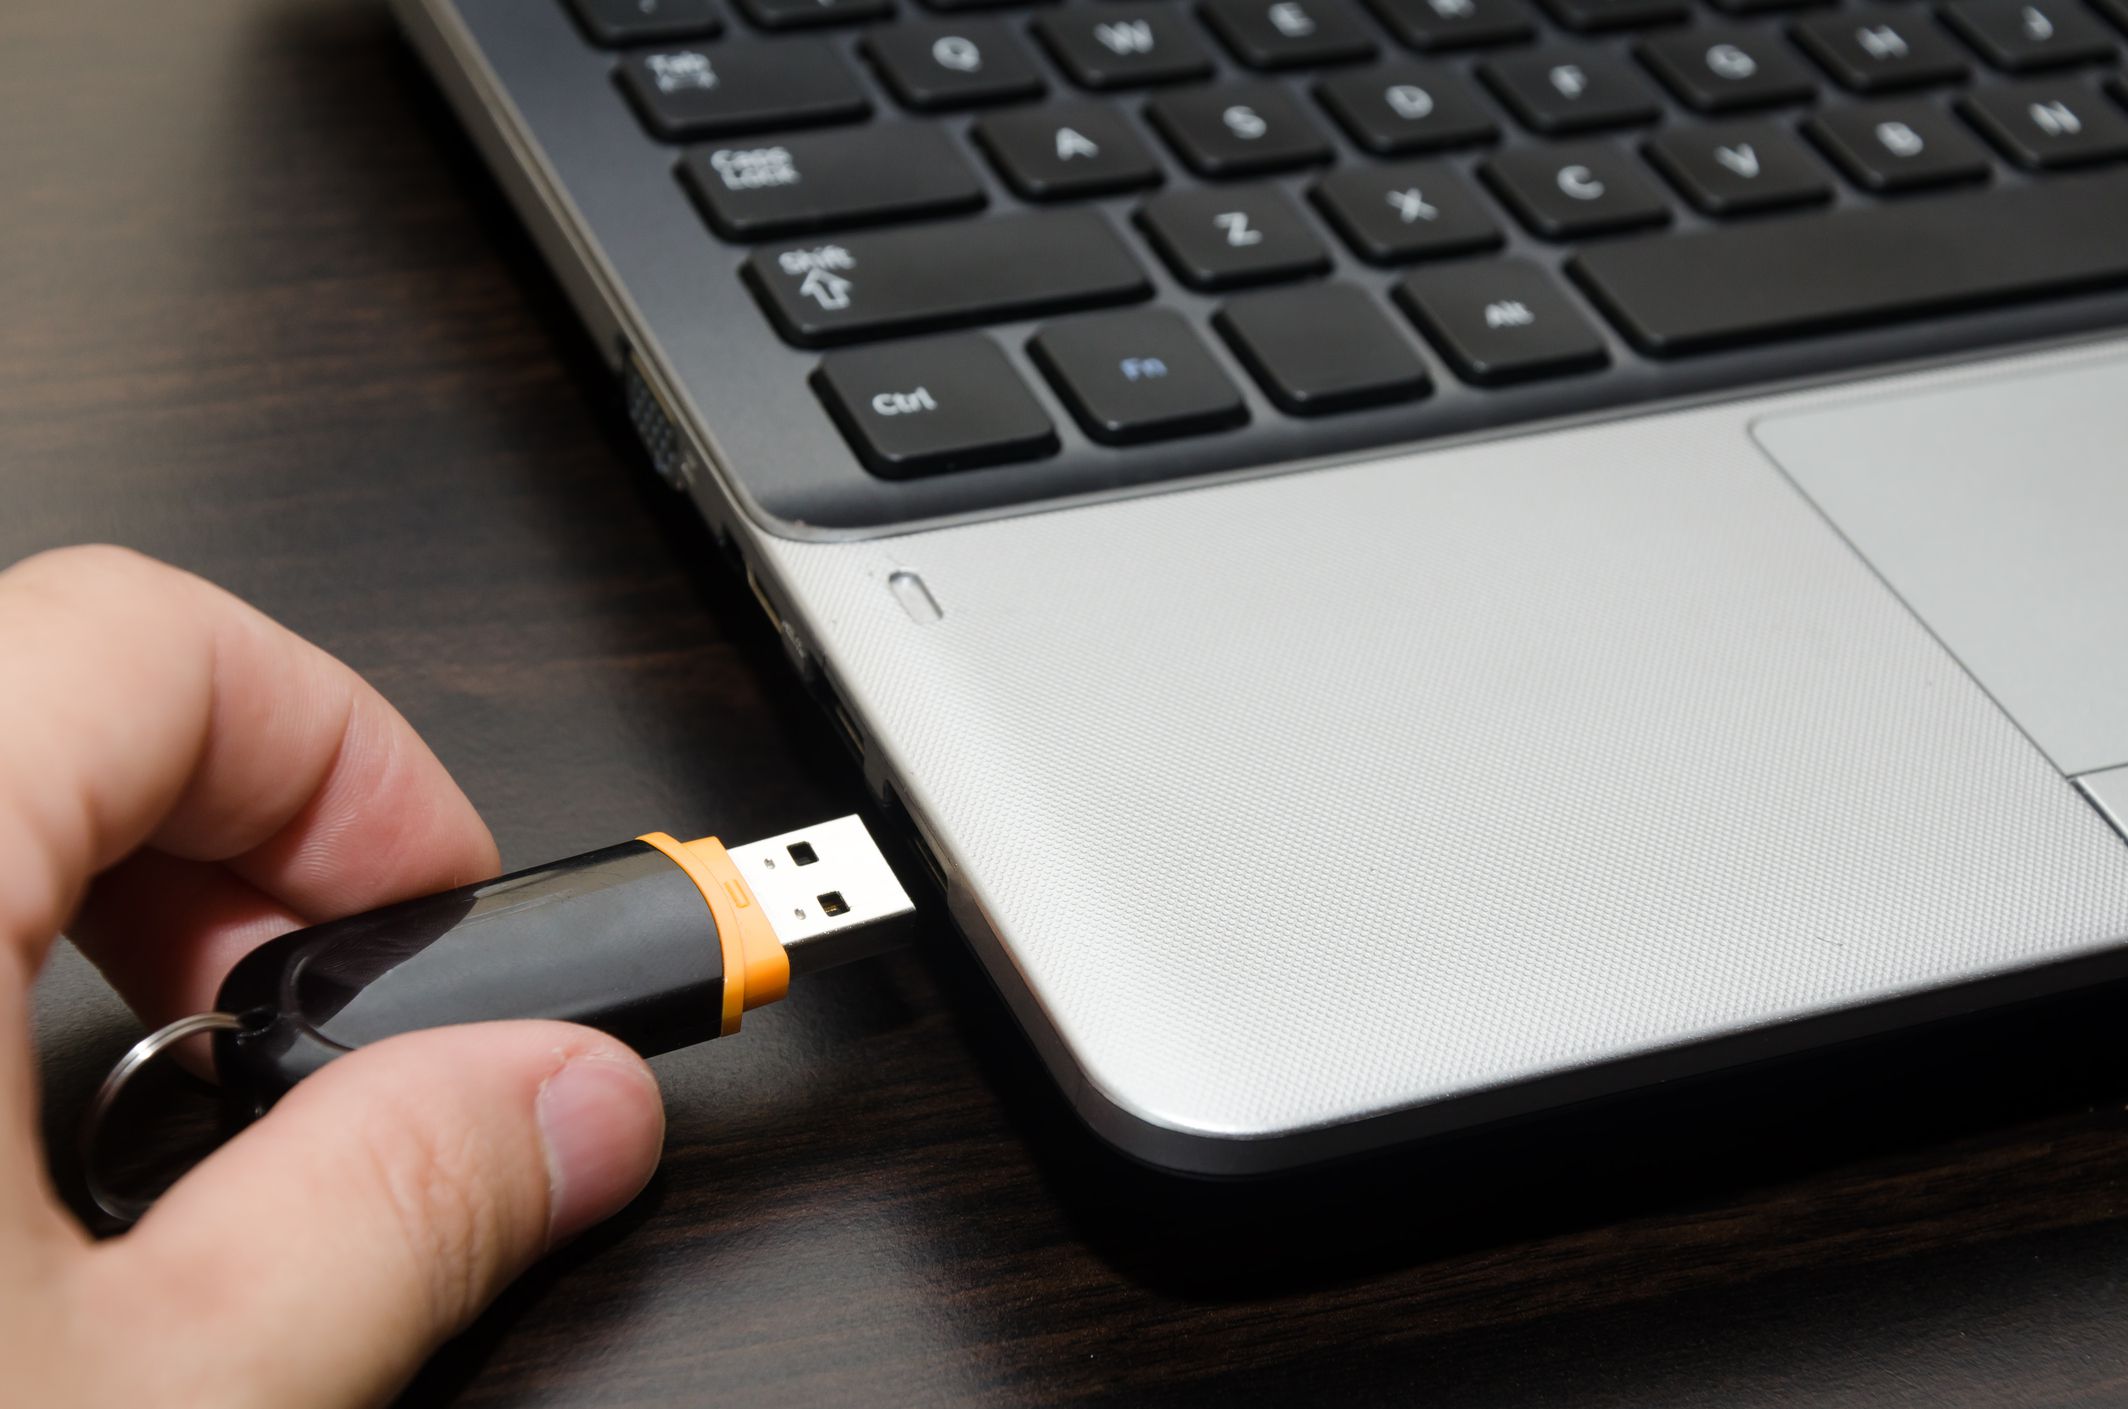 How to Boot From a USB Device (Flash Drive or Ext HDD)